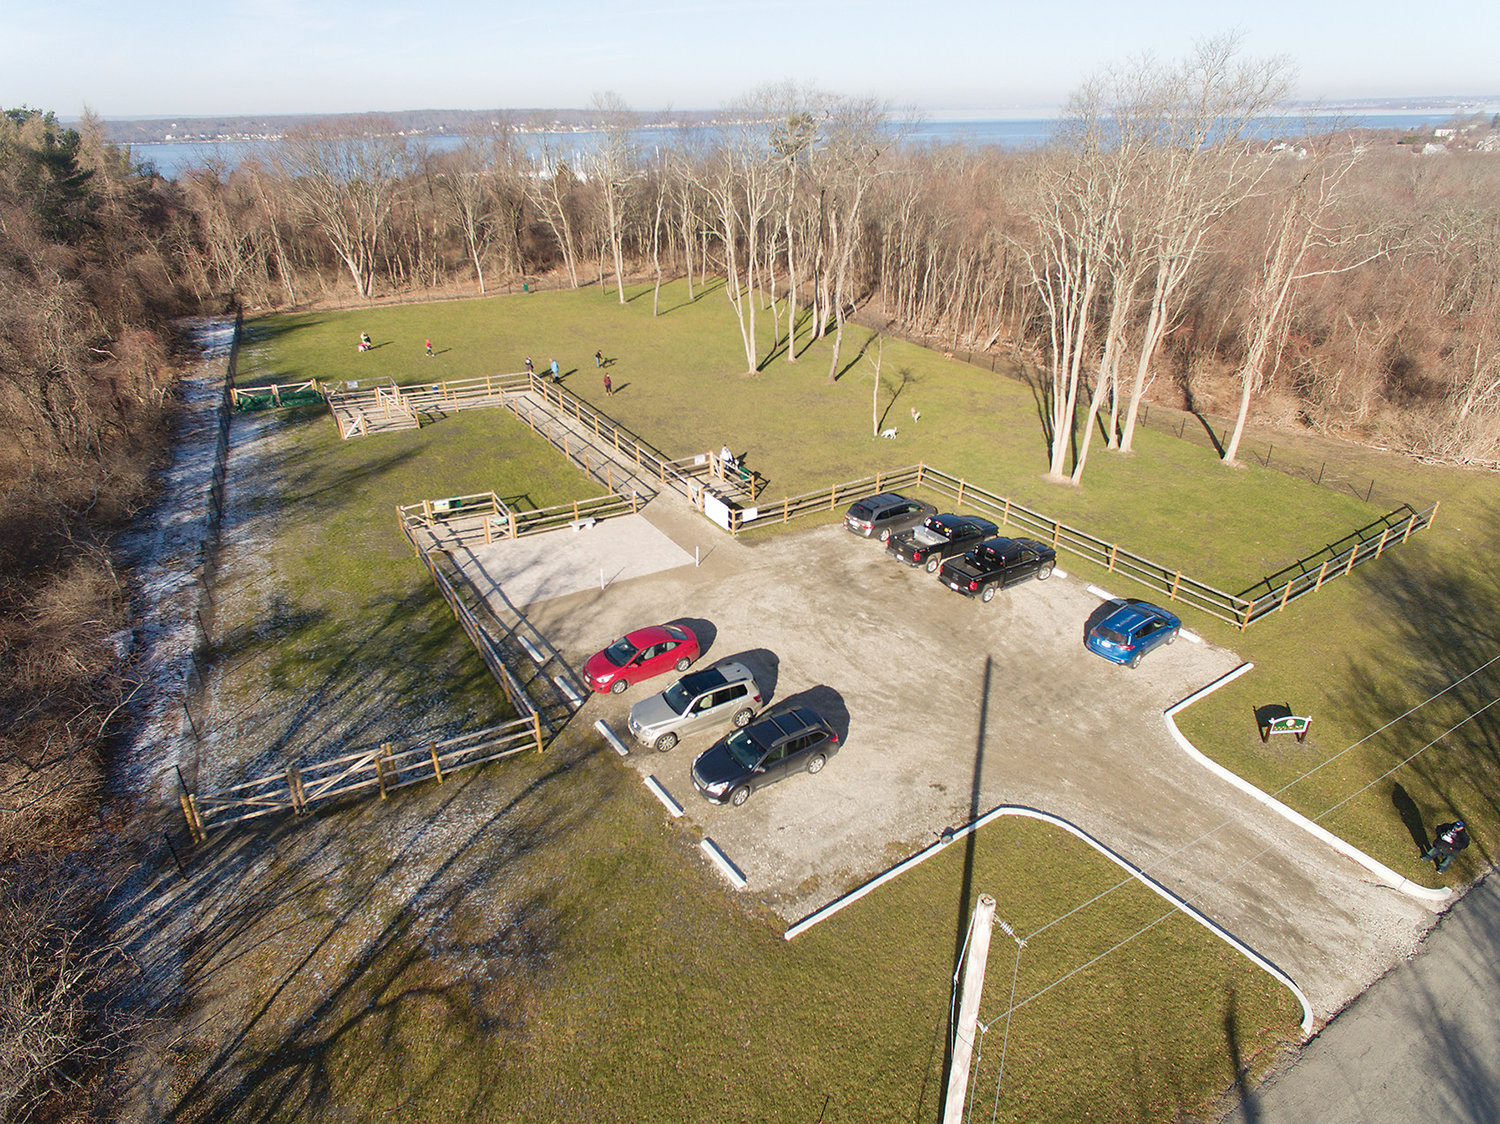 Aerial photograph of dog park shows the parking lot, small dog area at left and large dog area at right.